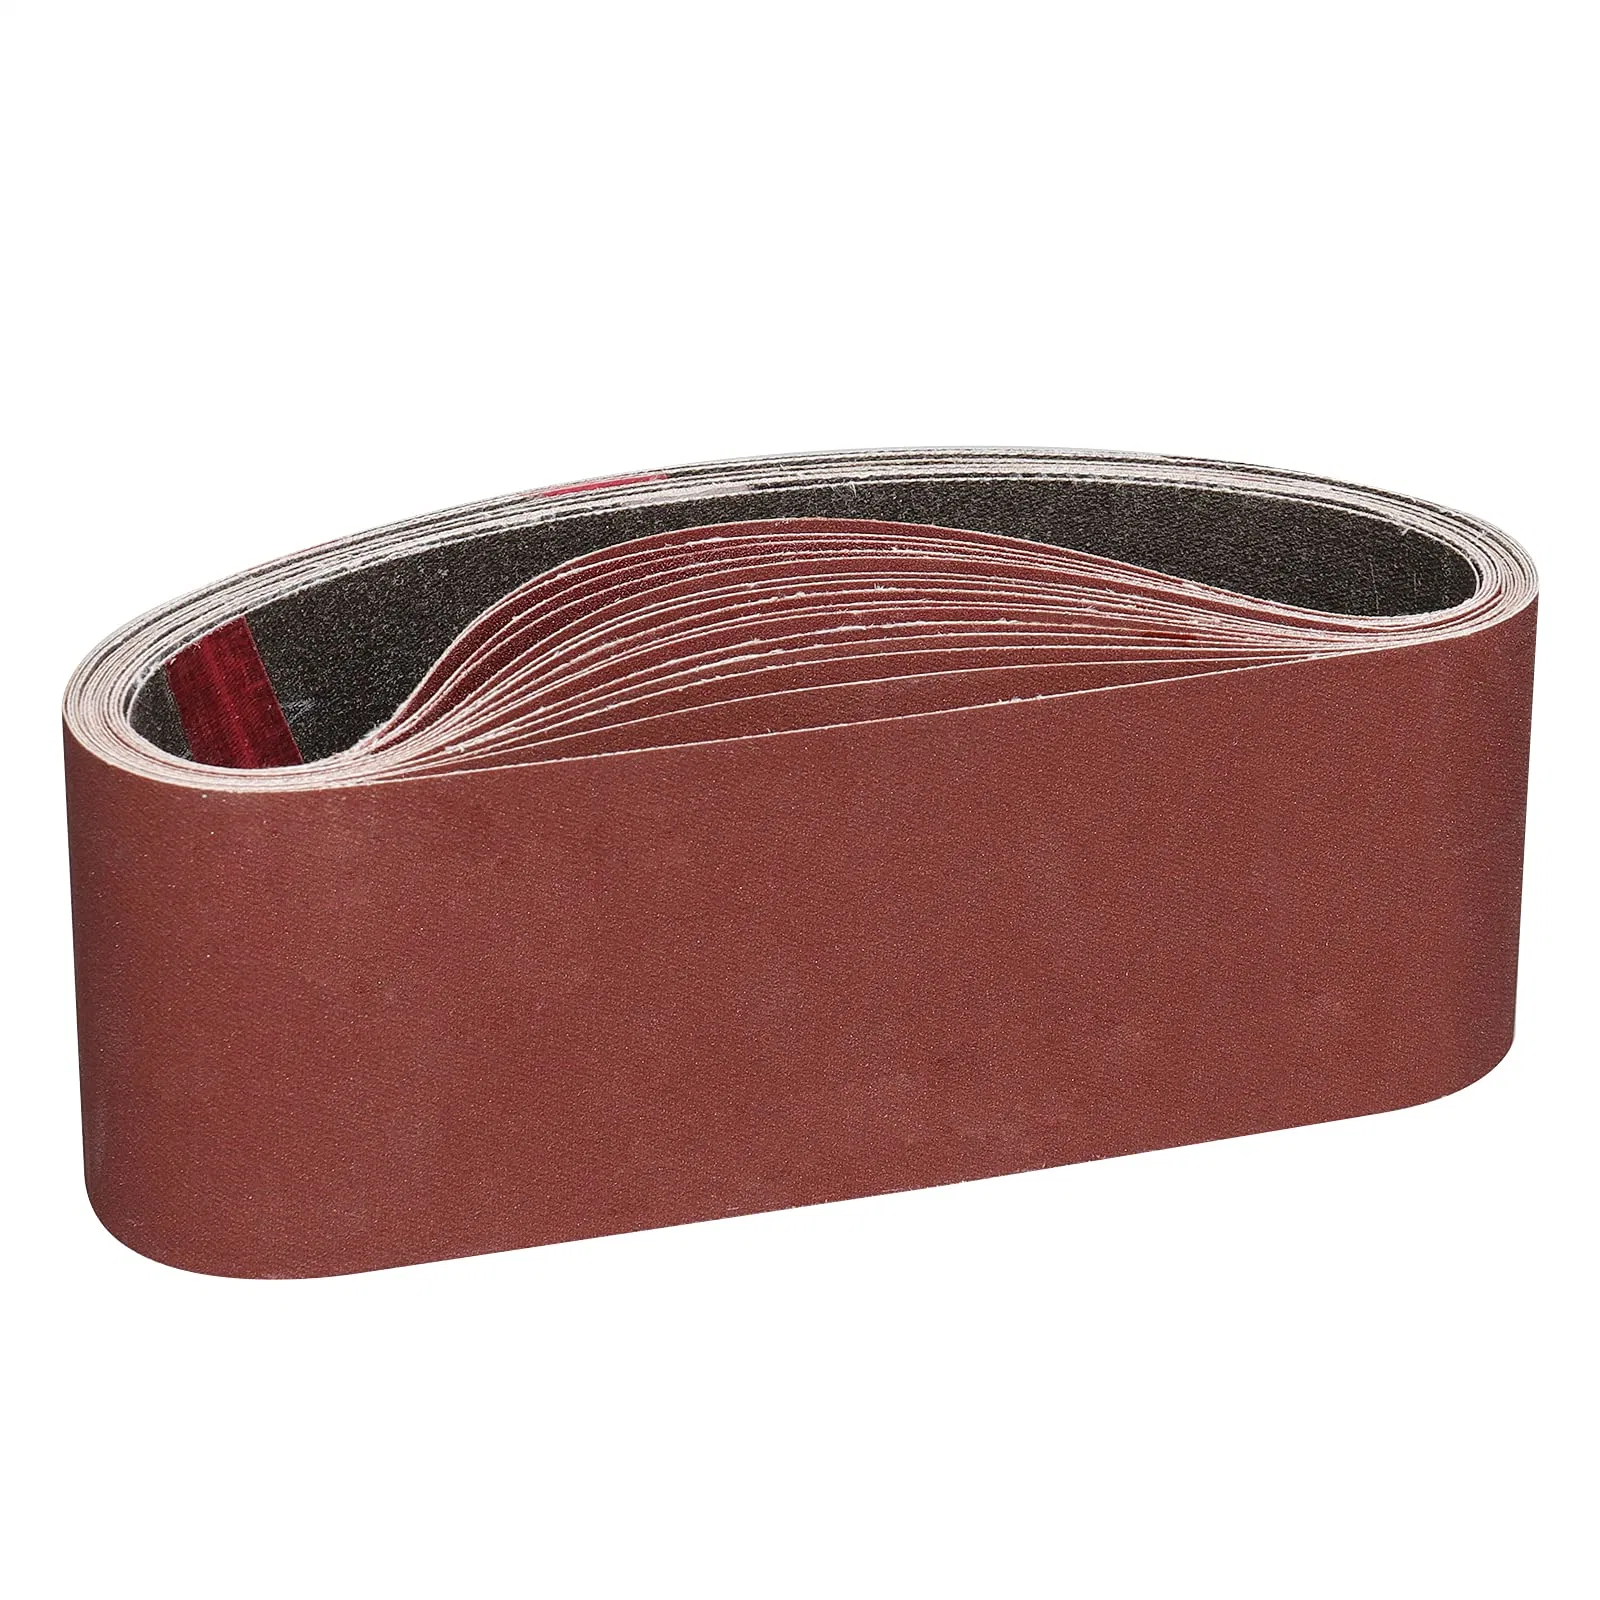 3 X 21 Inch Aluminum Oxide Sanding Belts for Sanding Wood, Metal and Paint